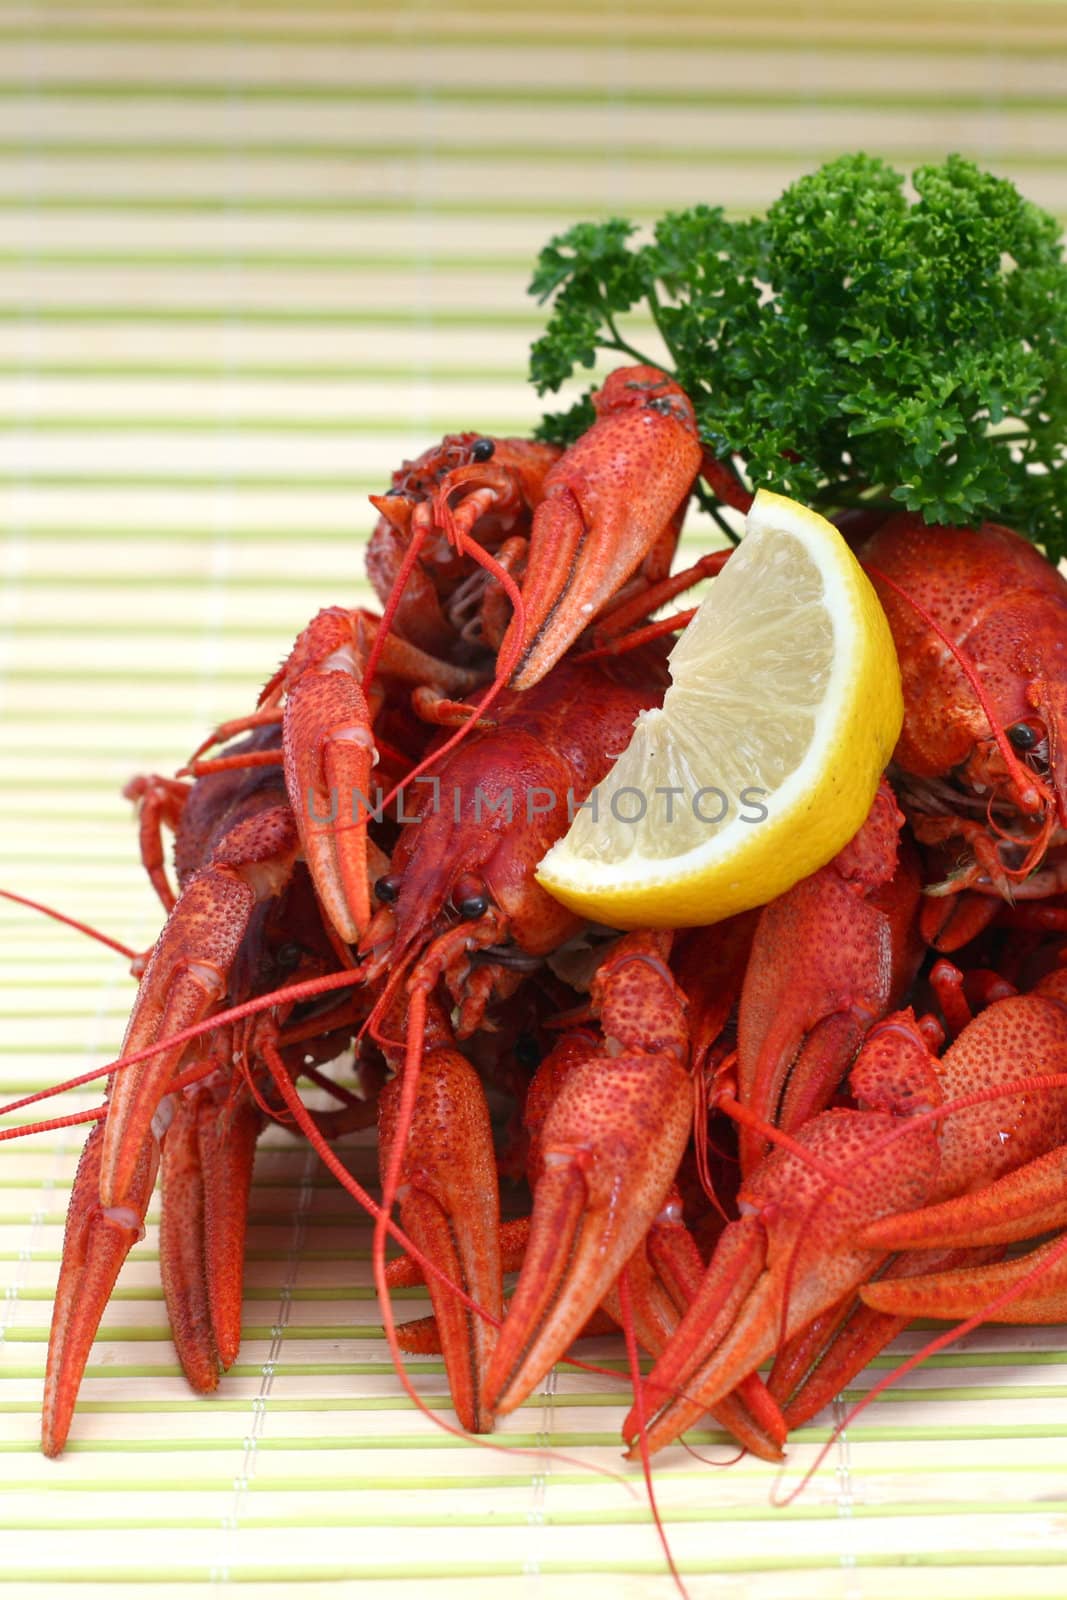 Hot boiled crayfish on striped background